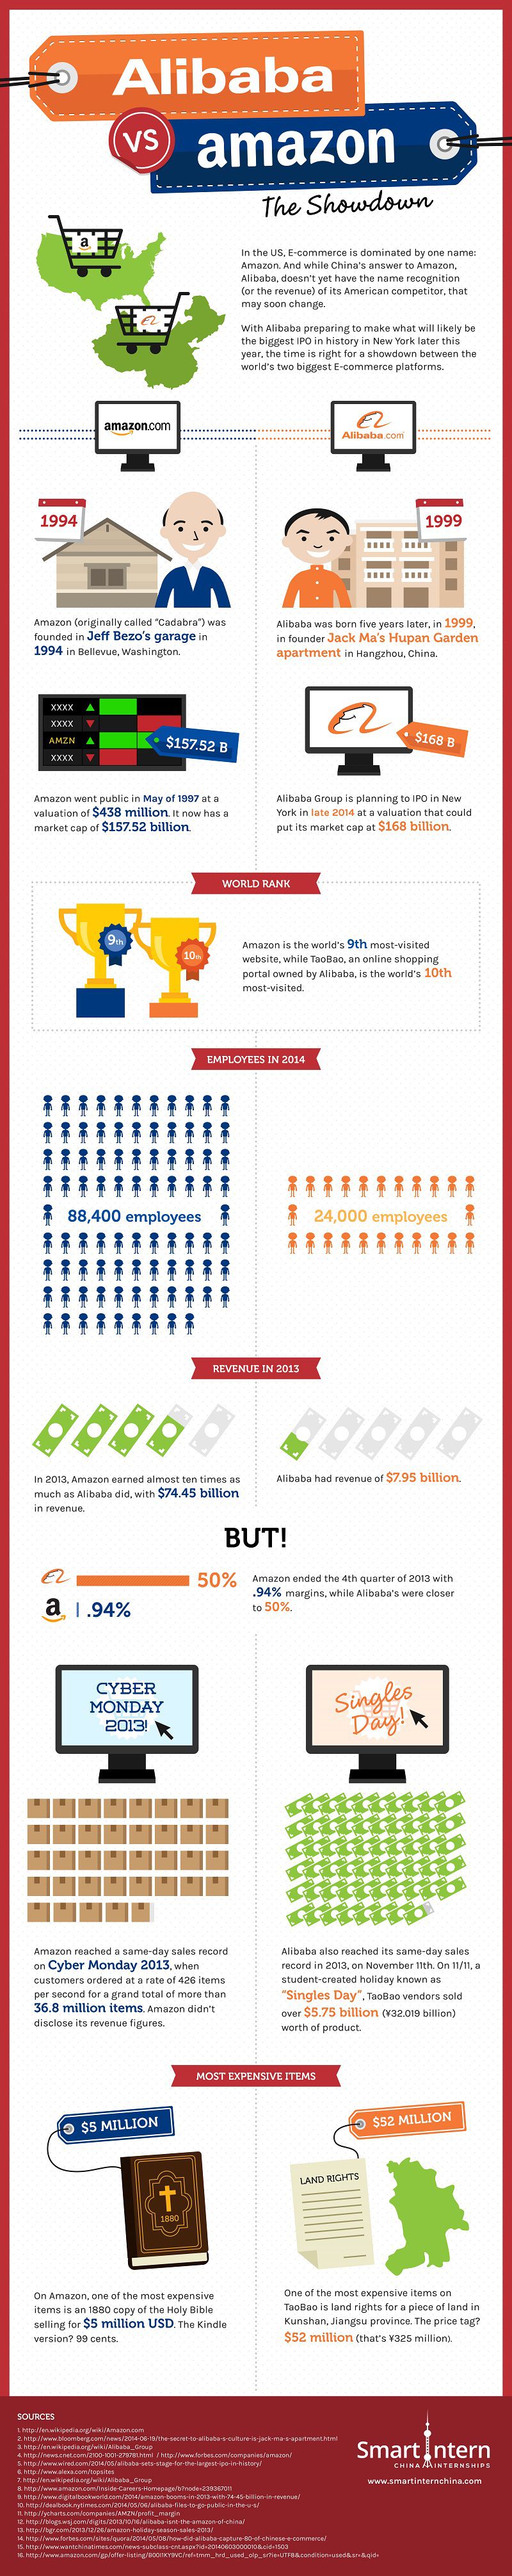 alibaba vs amazon infographic small reduced high res